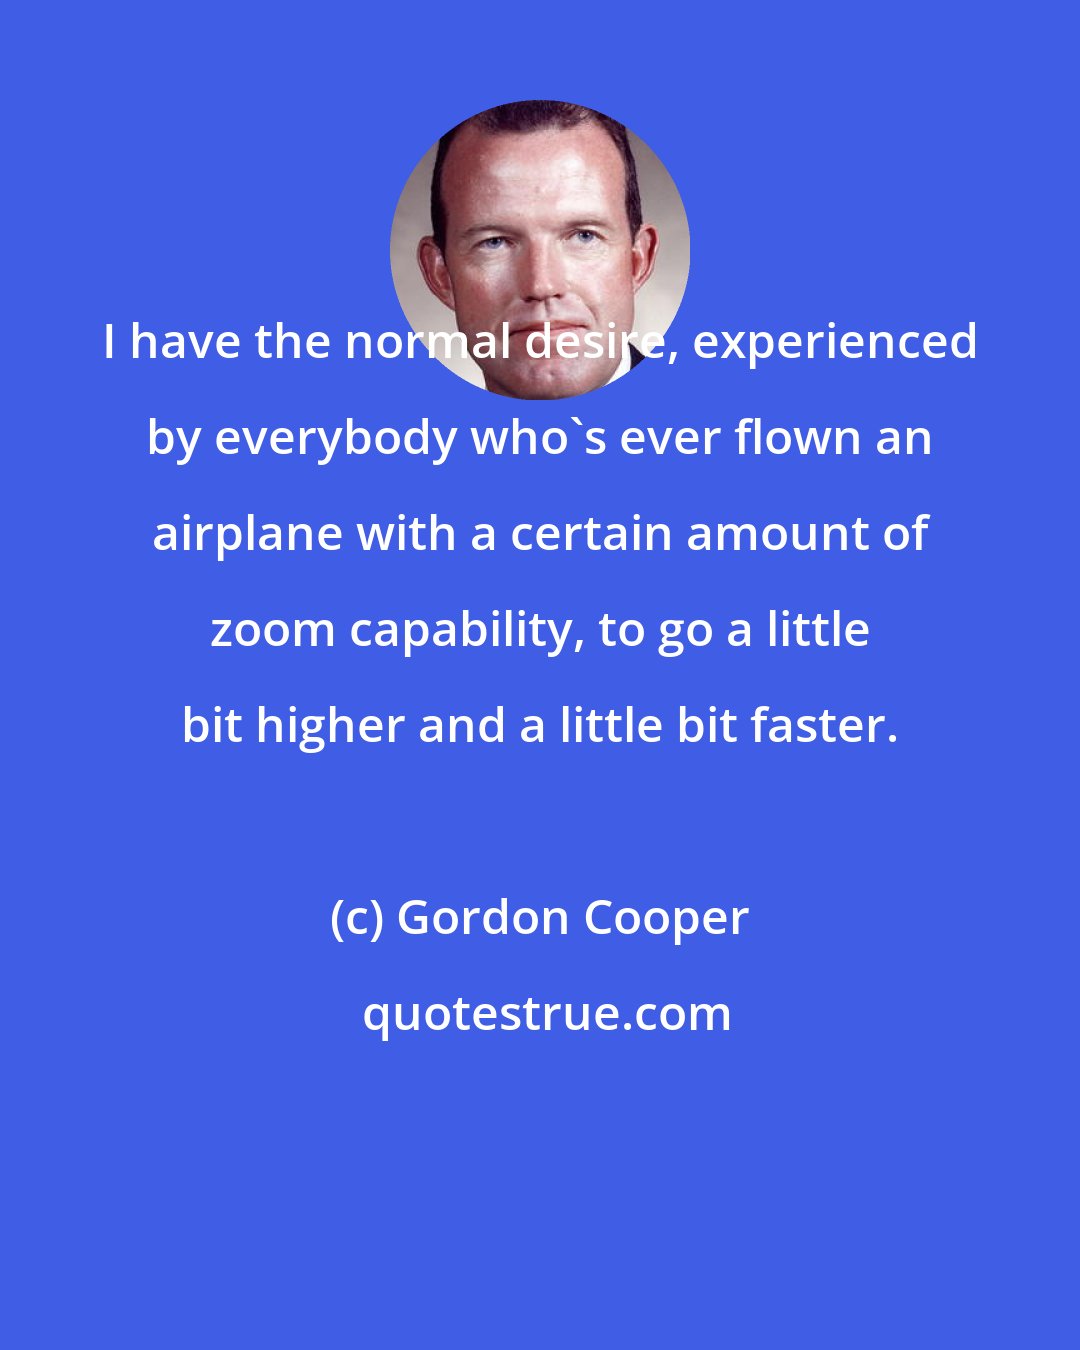 Gordon Cooper: I have the normal desire, experienced by everybody who's ever flown an airplane with a certain amount of zoom capability, to go a little bit higher and a little bit faster.